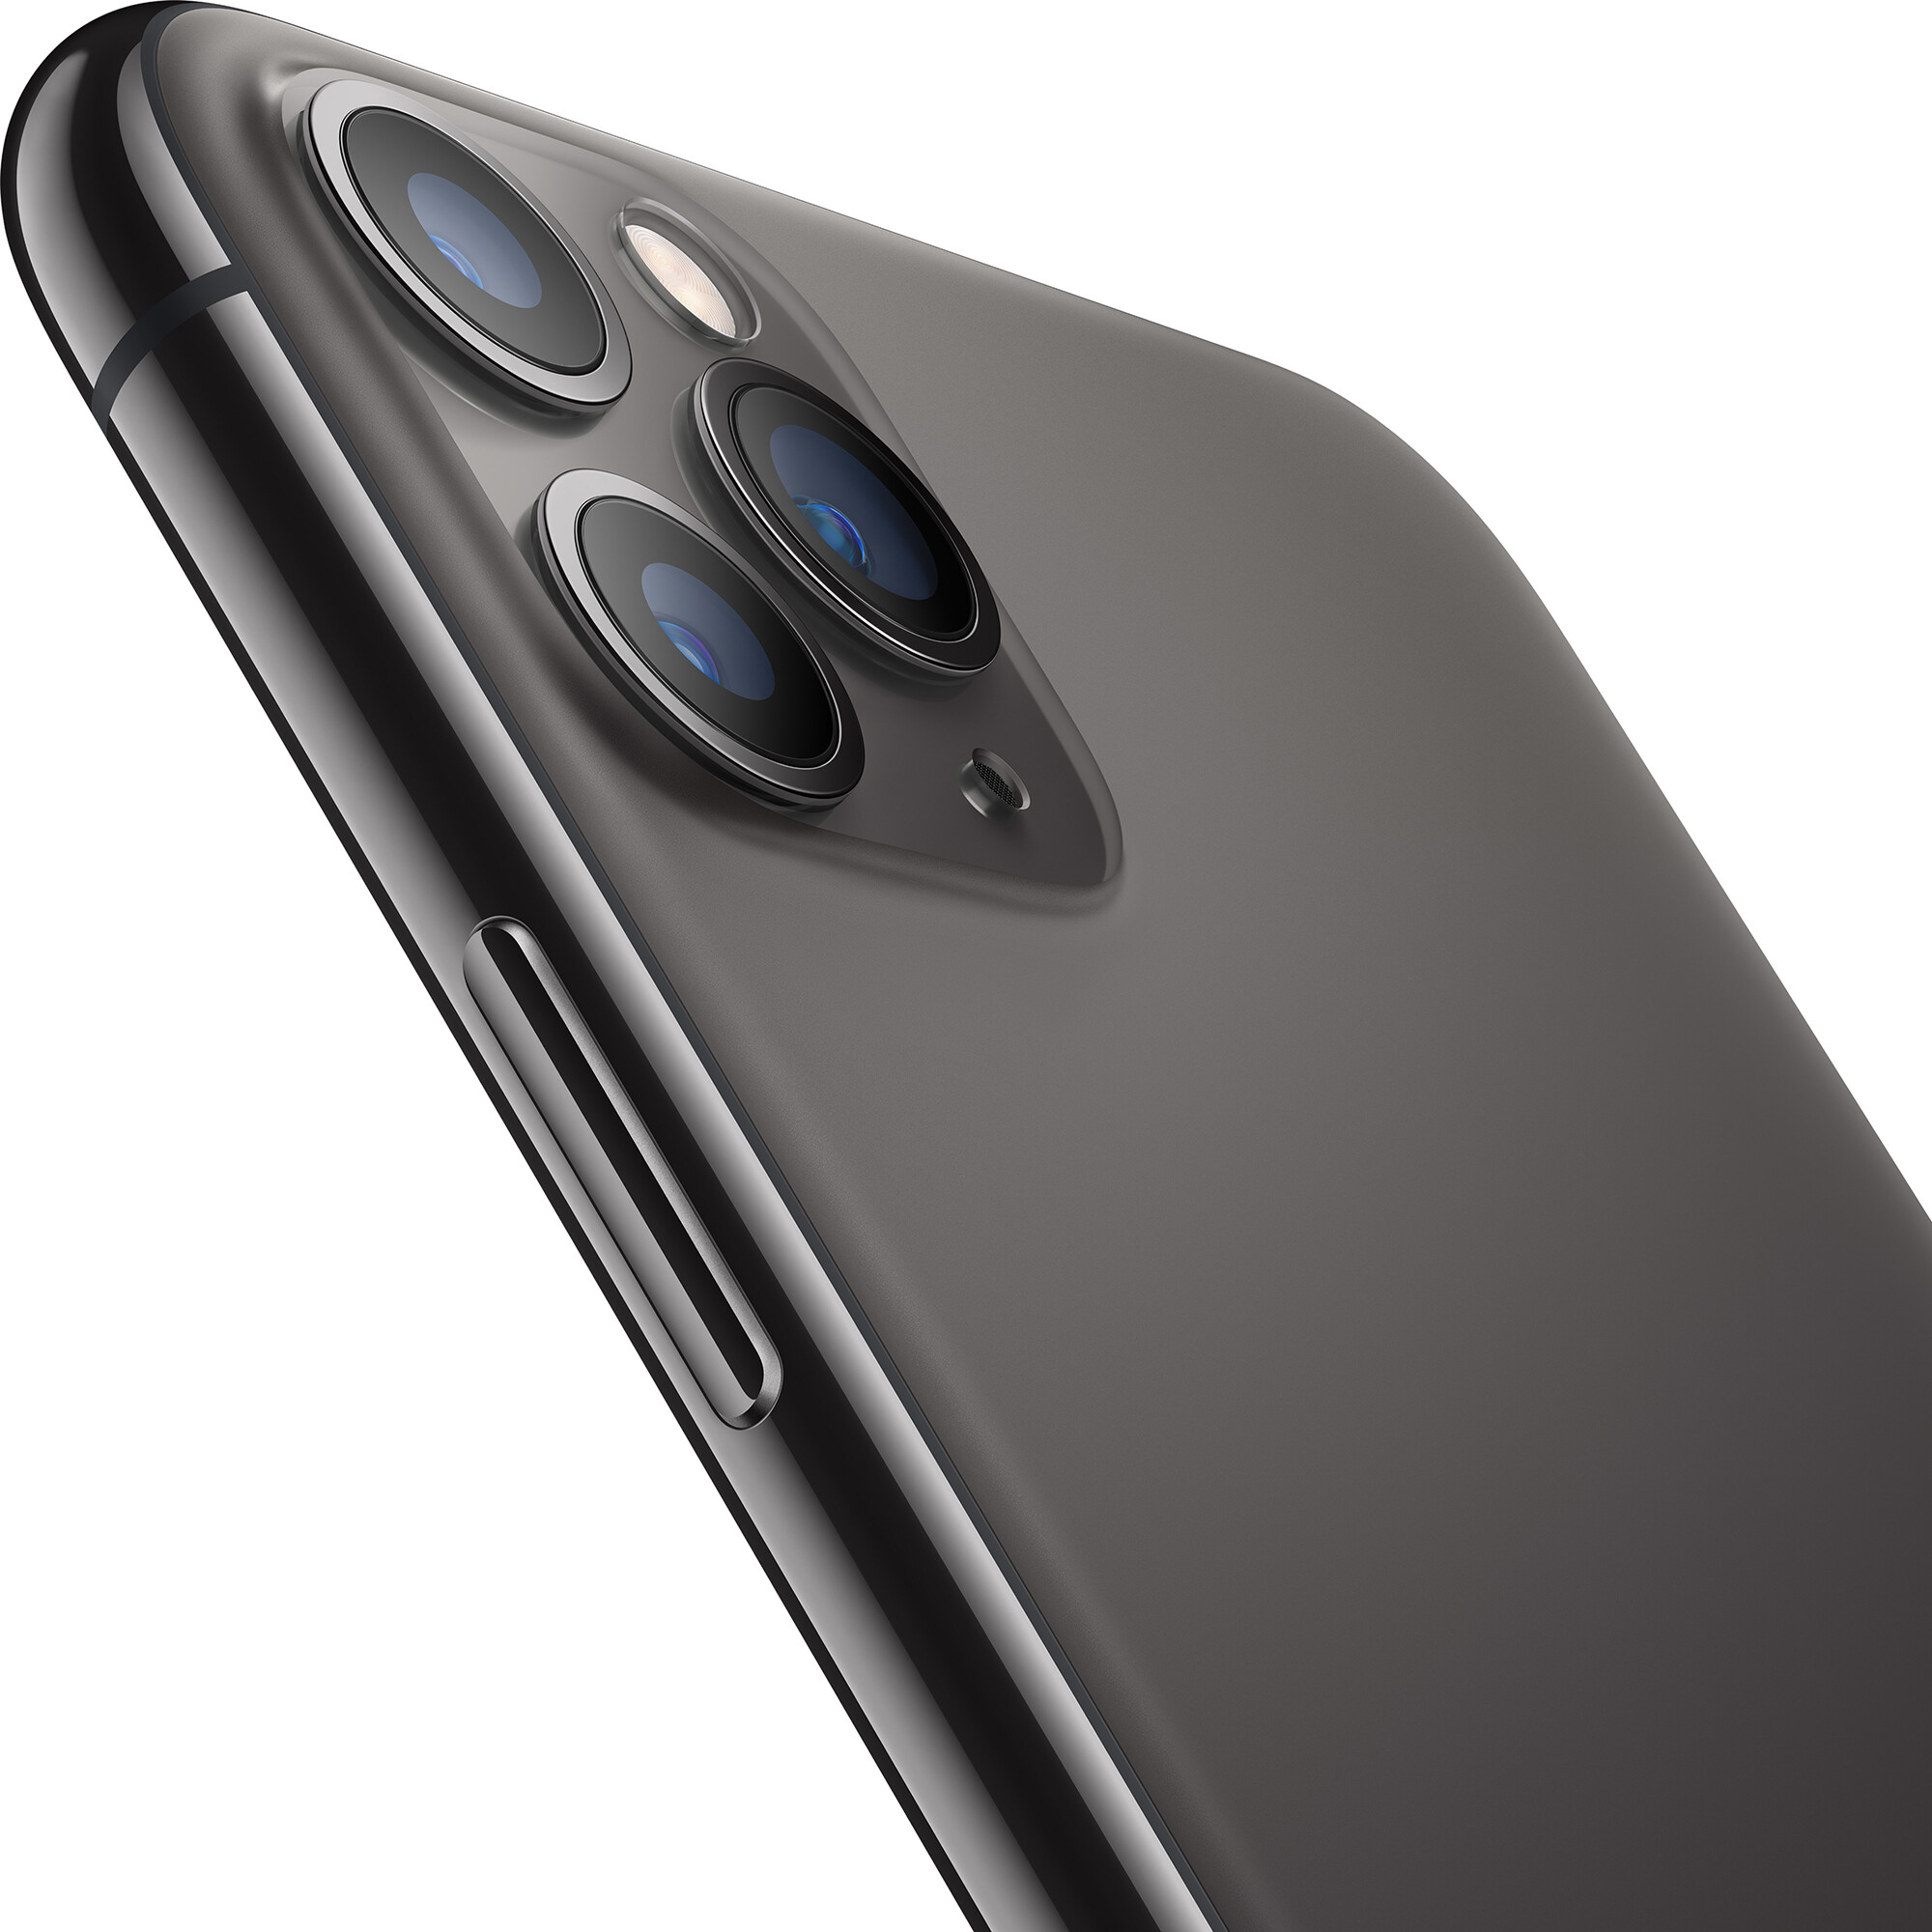  Apple iPhone 11 Pro 64GB Space Gray (MWC22)